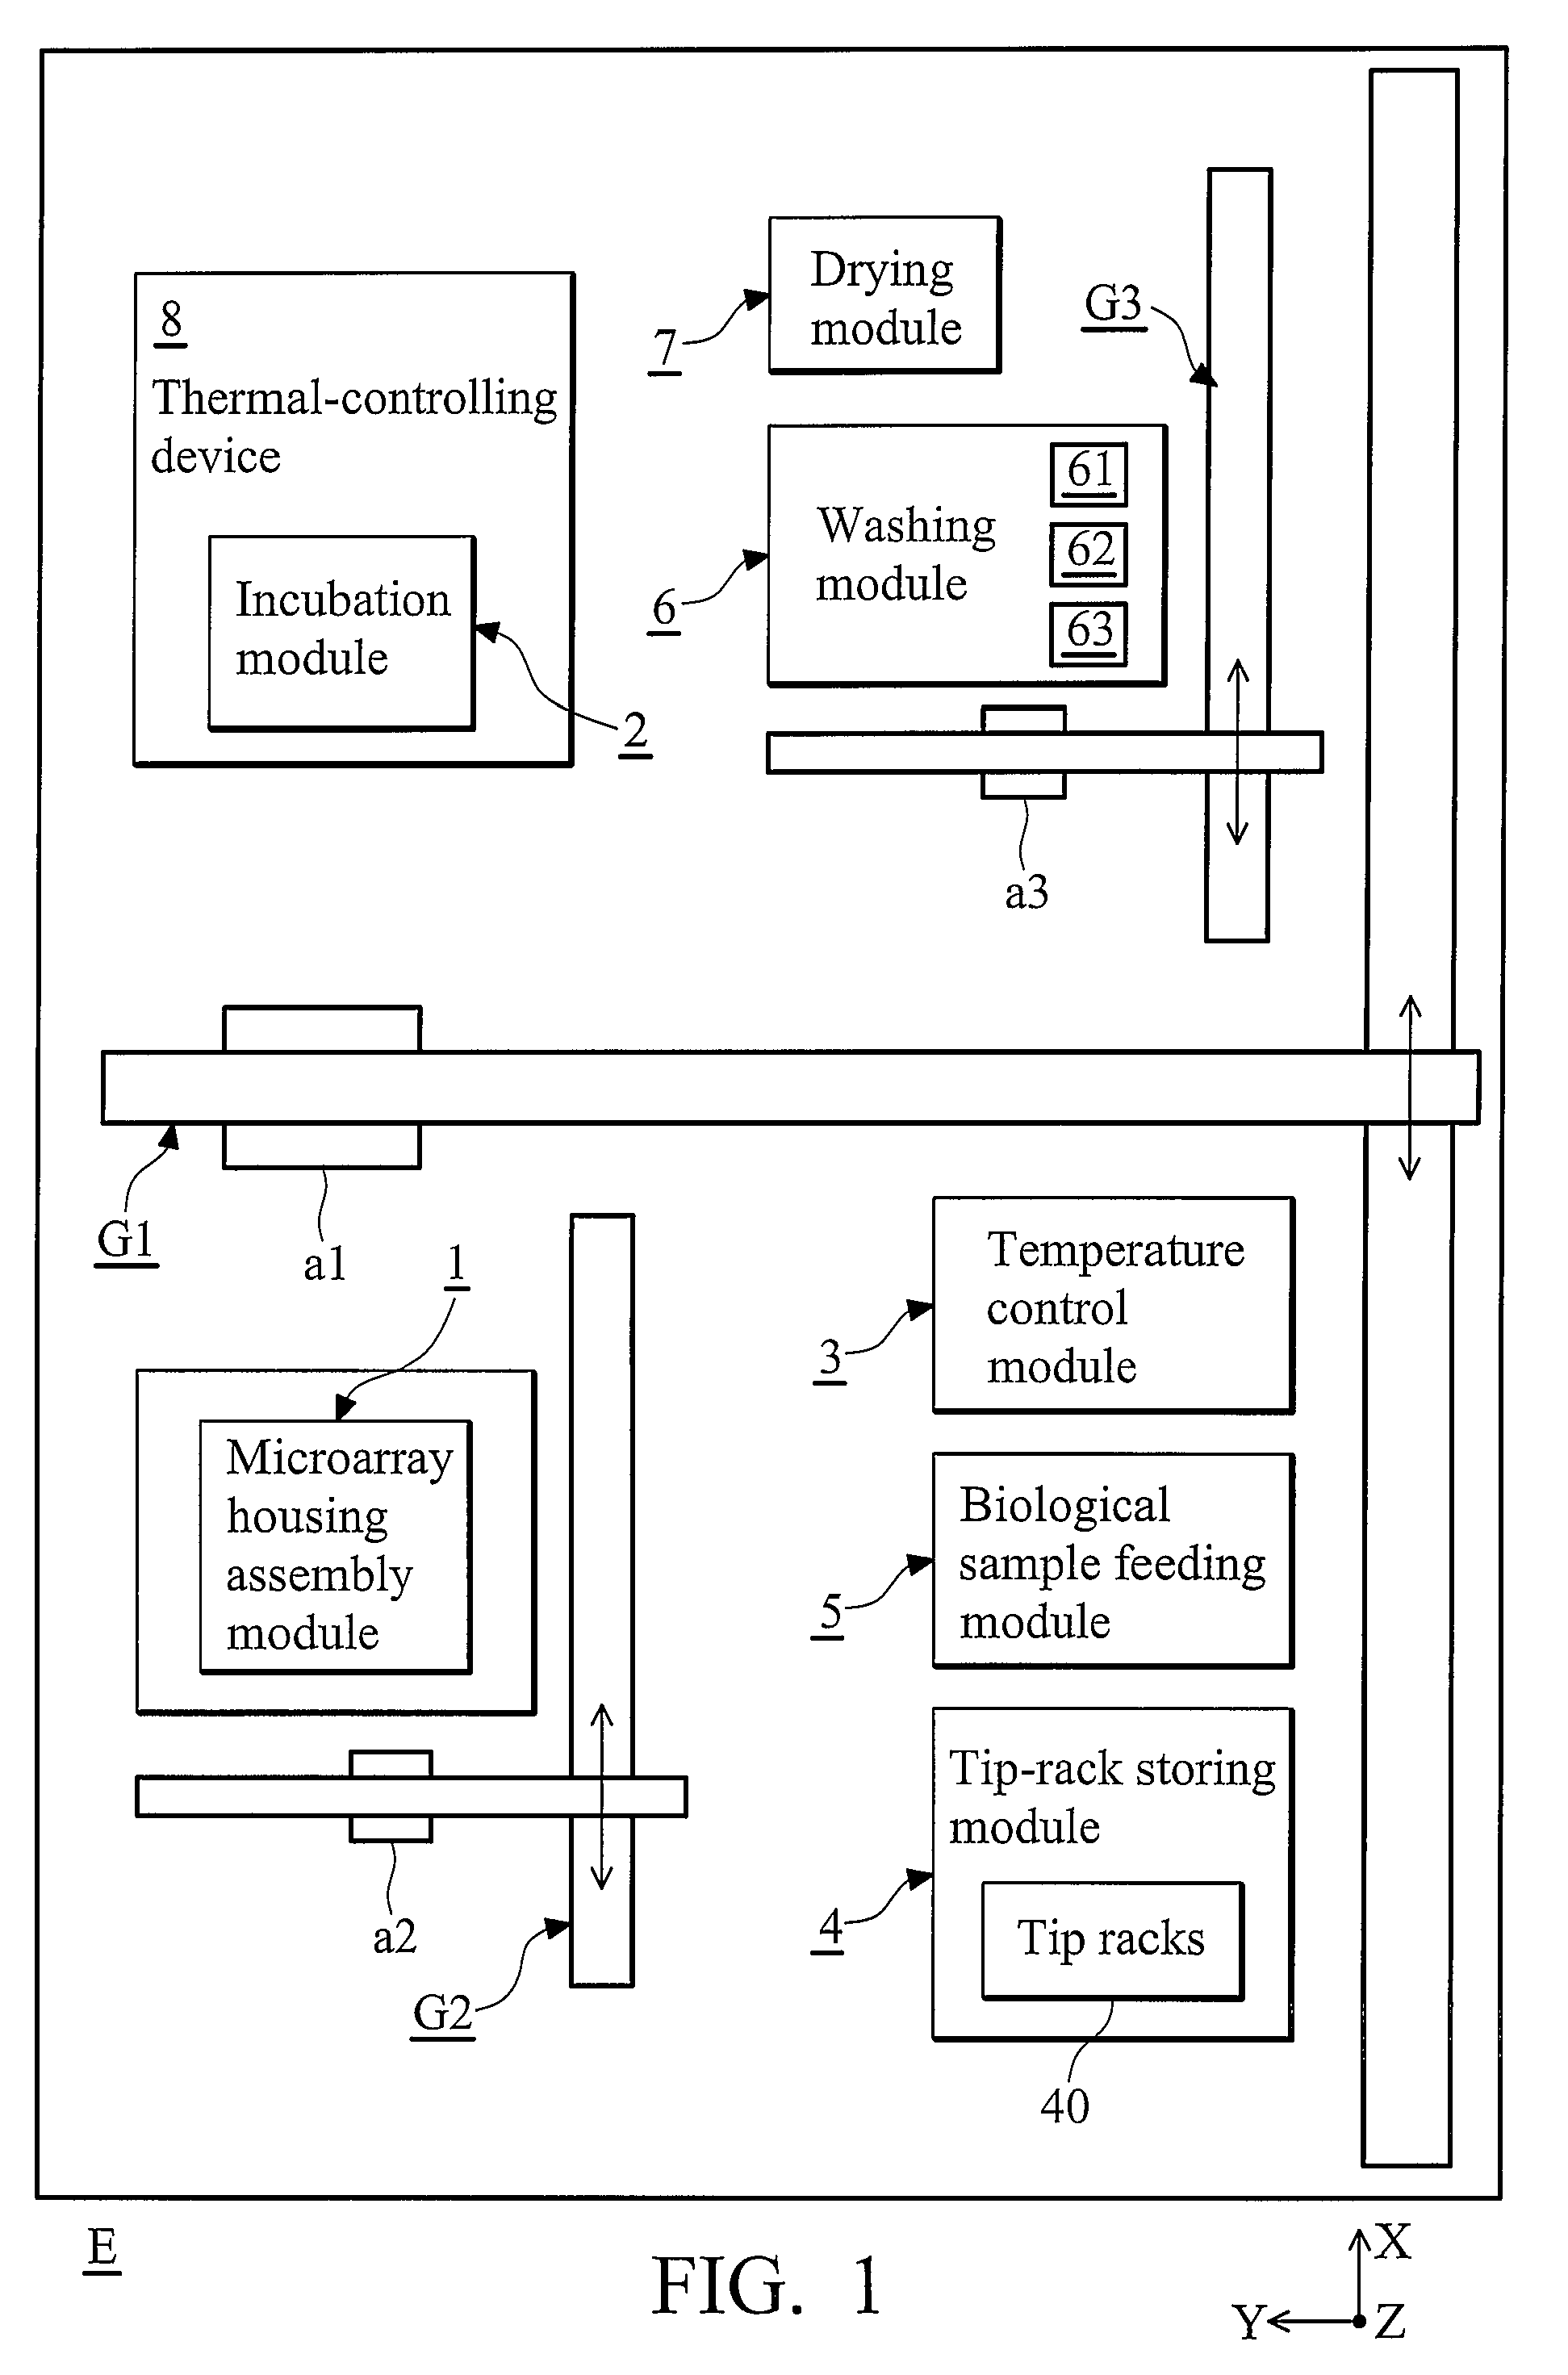 Fully automated microarray processing system